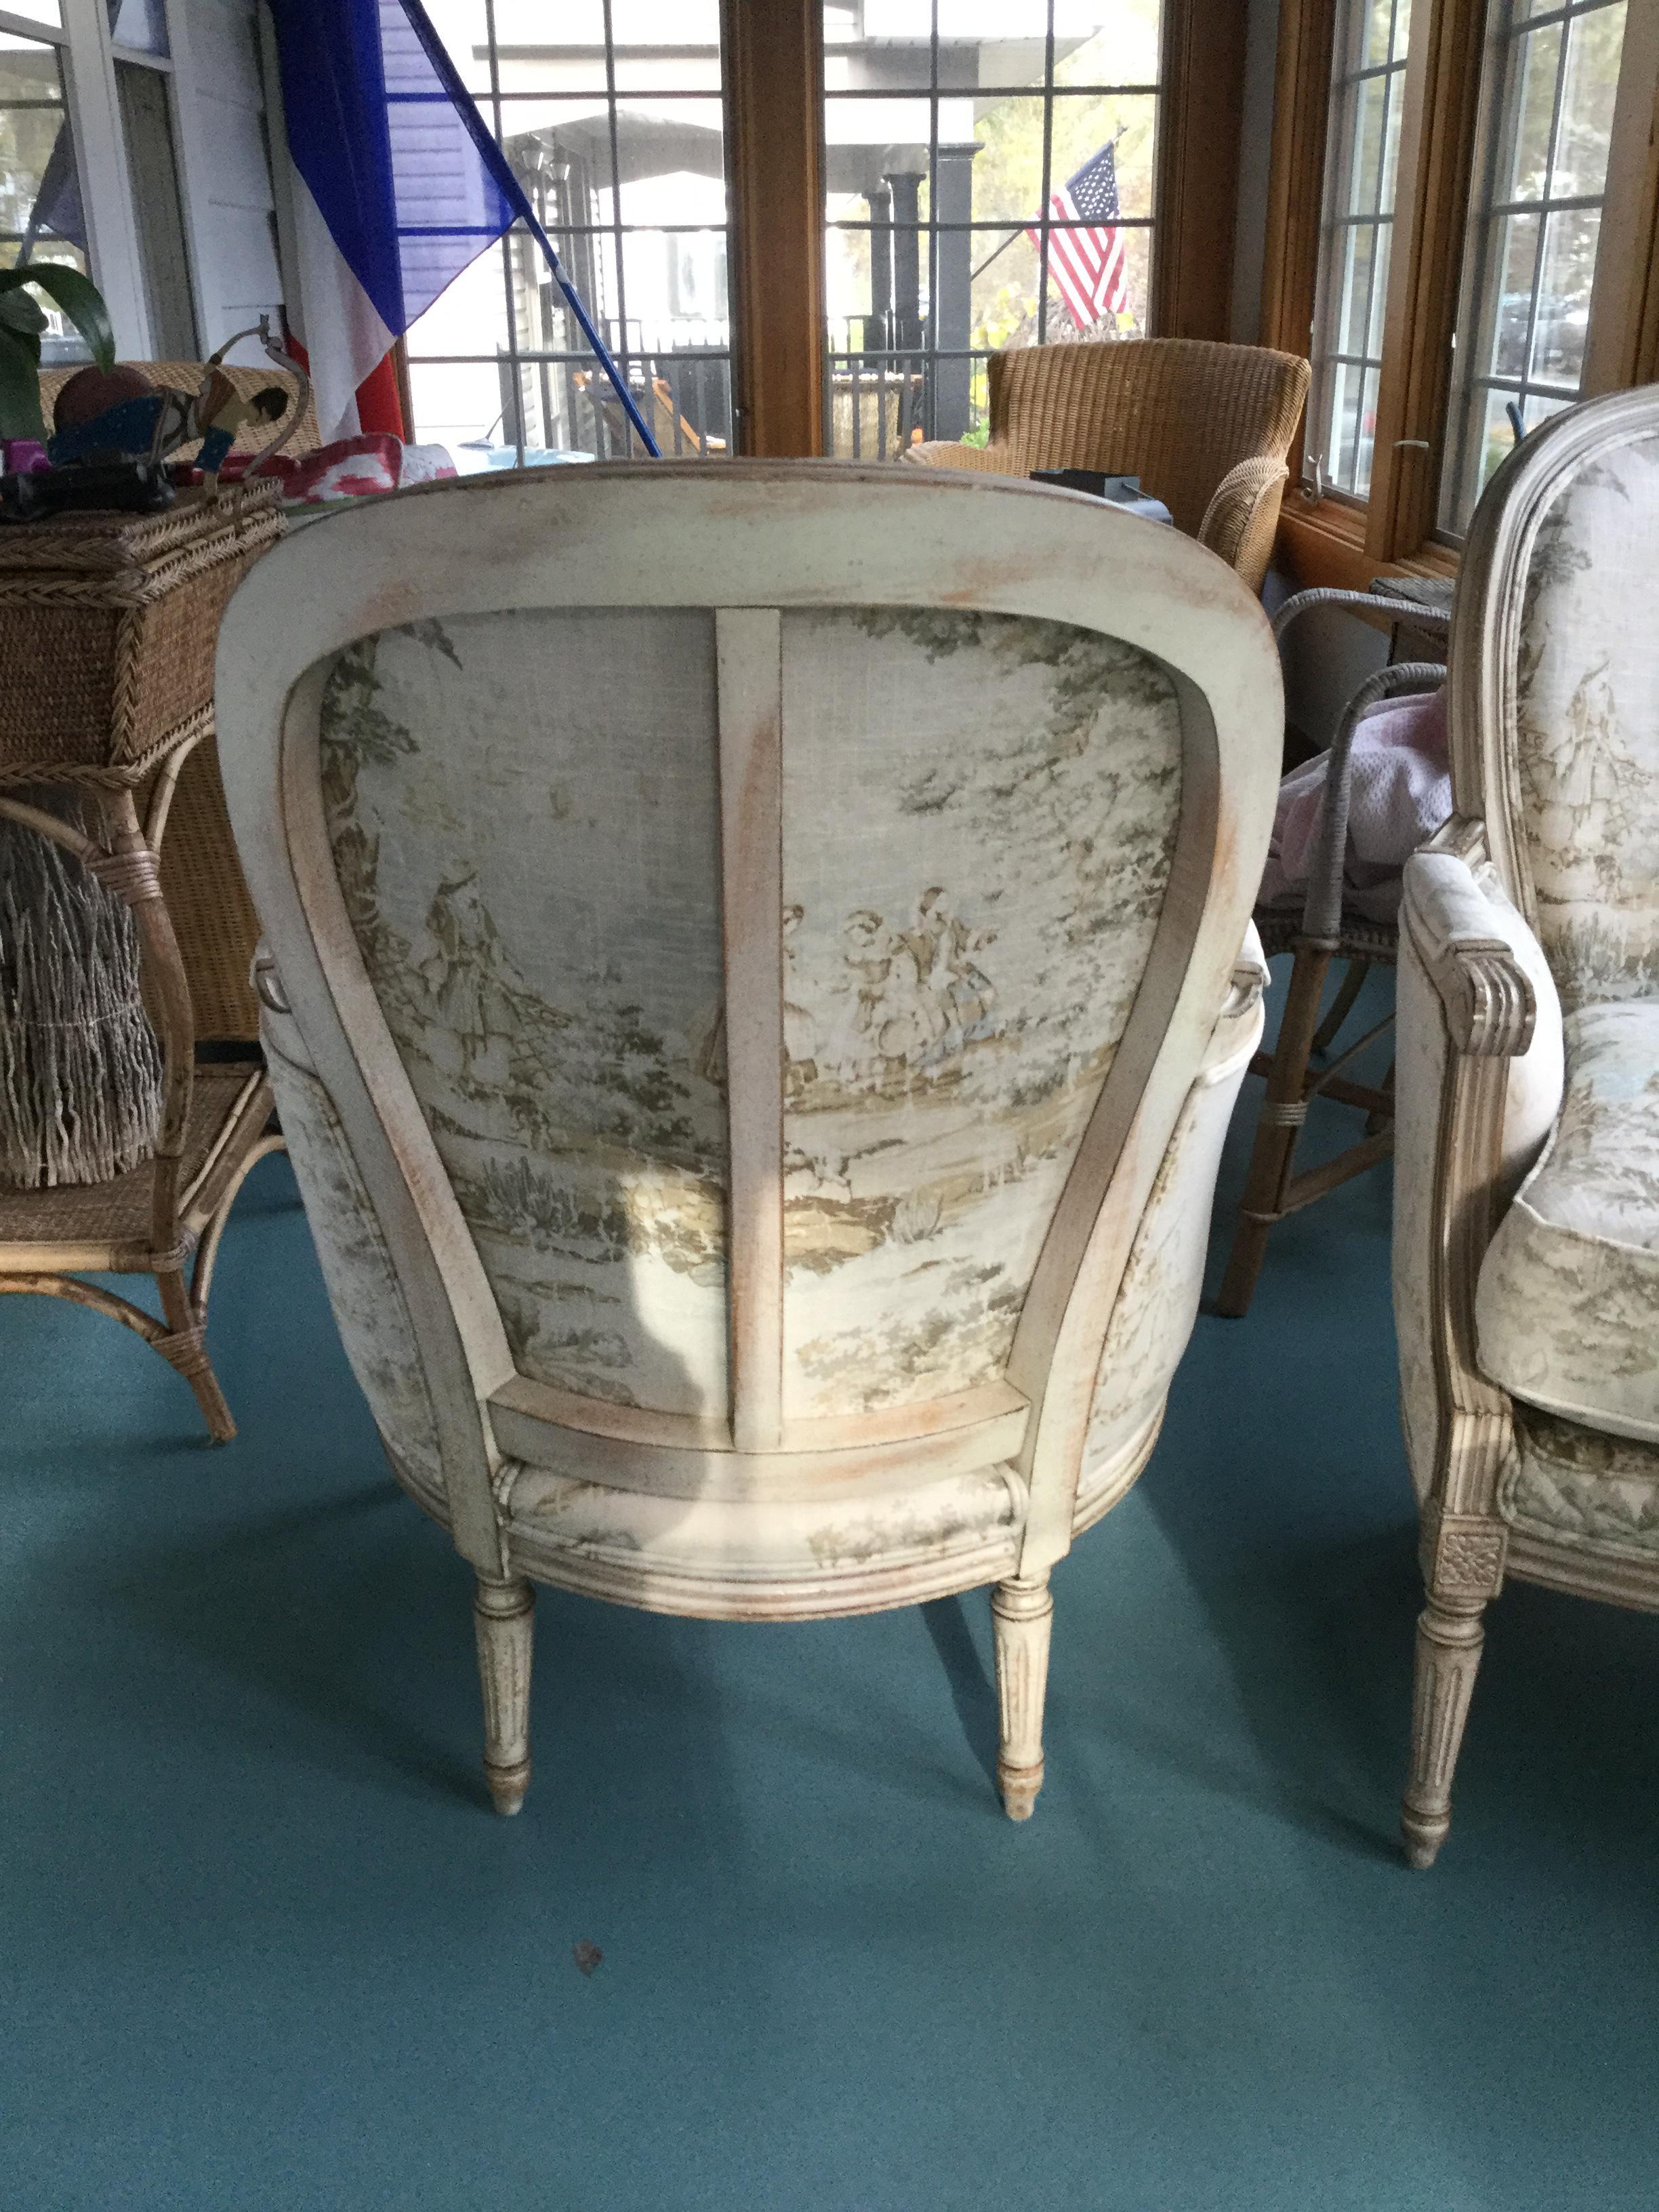 Stunning pair of French painted bergère chairs. These chairs feature beautifully carved frames with an antique white finish. Typical of Louis XVI, the legs are fluted and the back is rounded. The toile upholstery is in shades of very soft green,